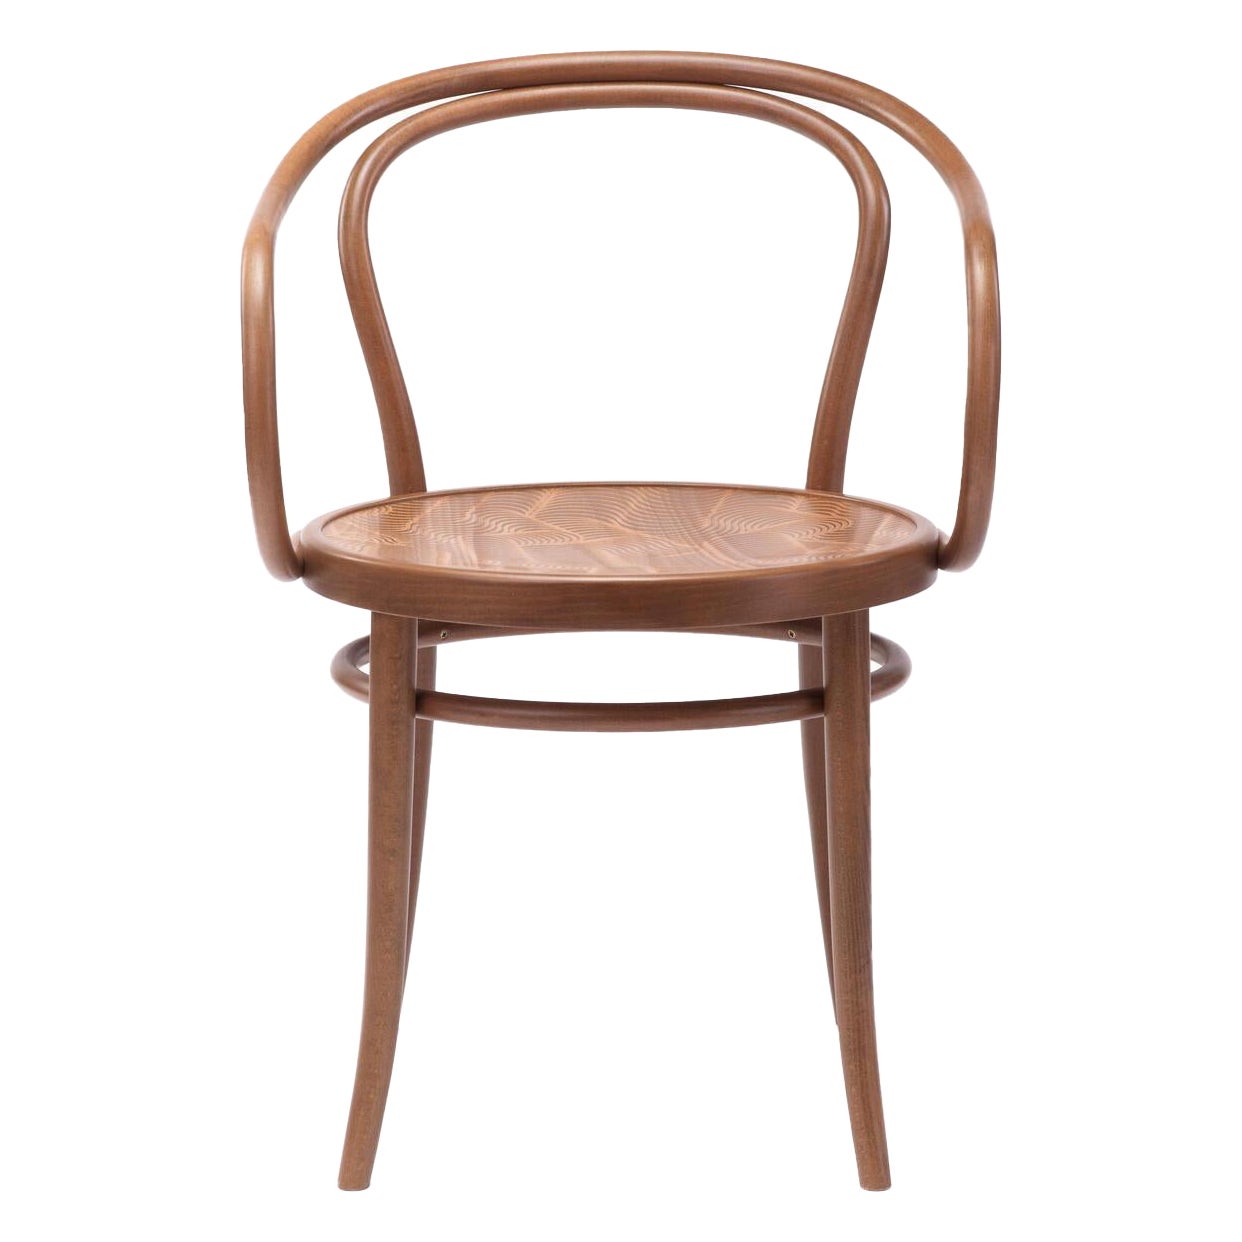 TON a.s. Dining Room Chairs